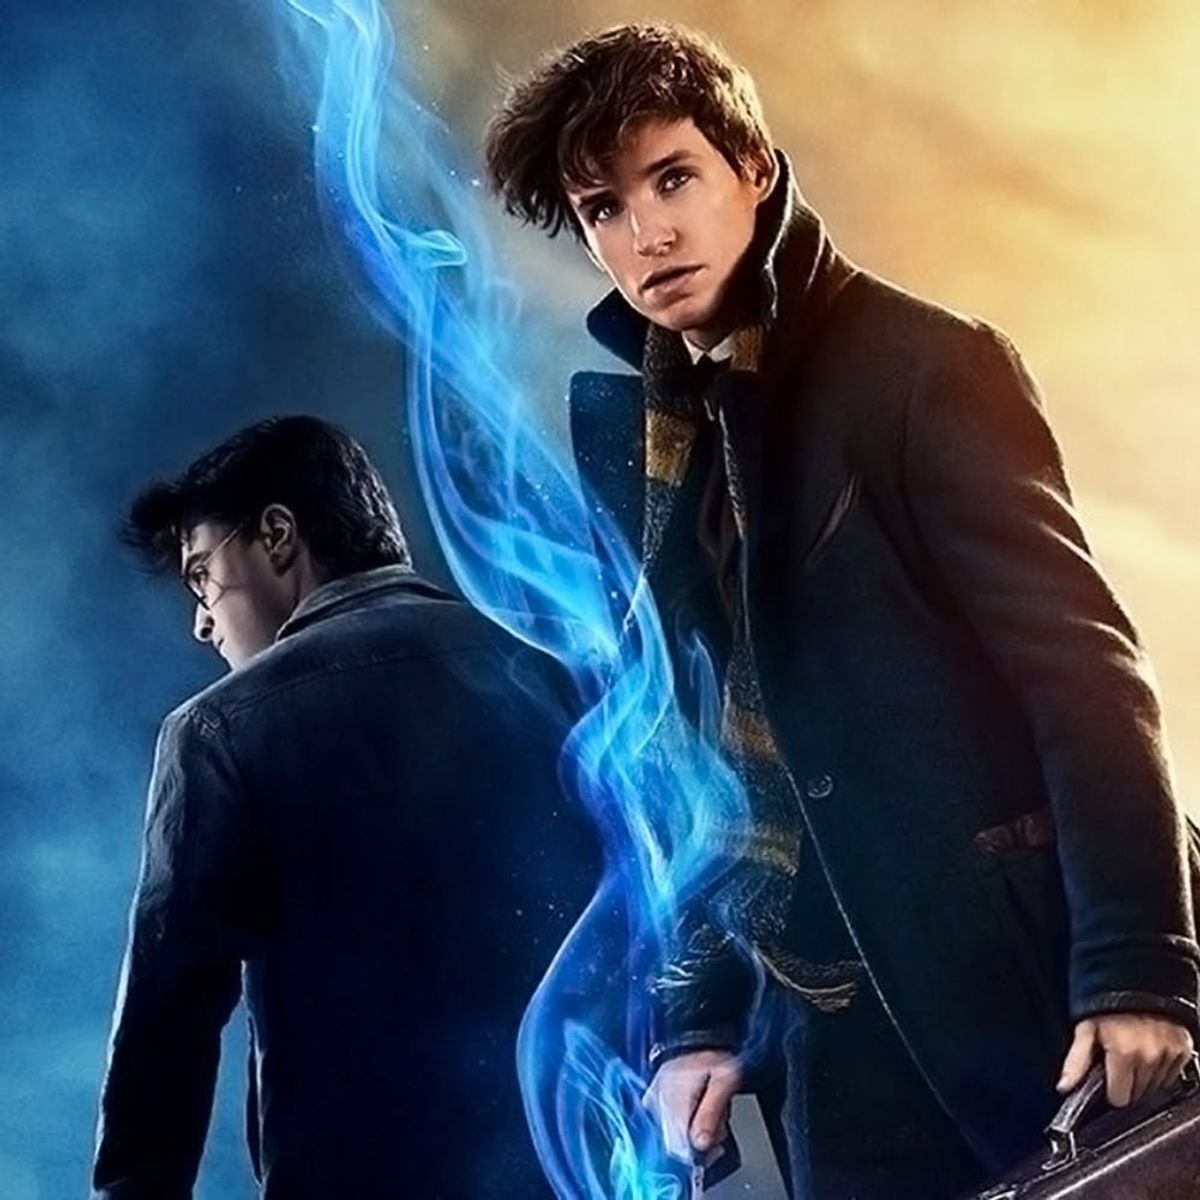 This Super Cool Deet Proves Newt Scamander Was at Hogwarts During the Harry Potter Movies